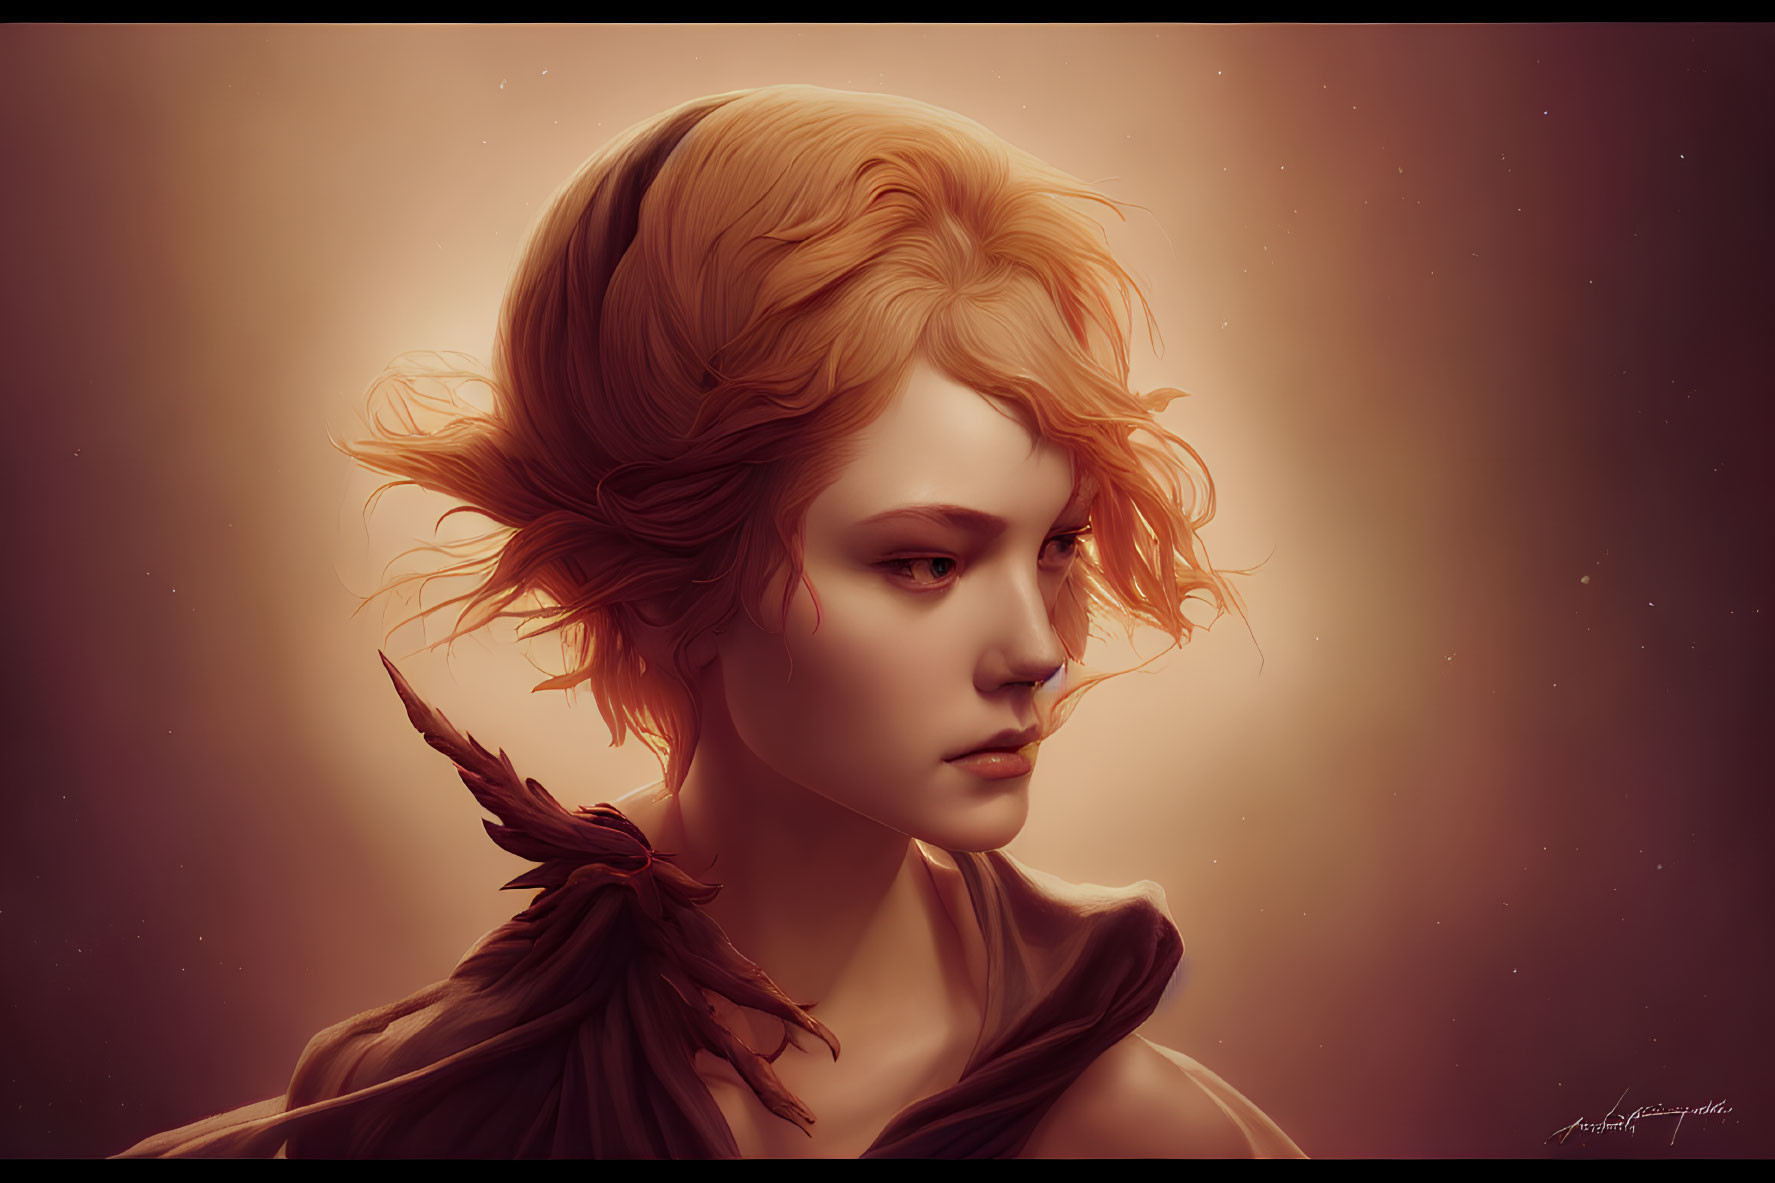 Striking ginger hair and feather adornment against warm backdrop